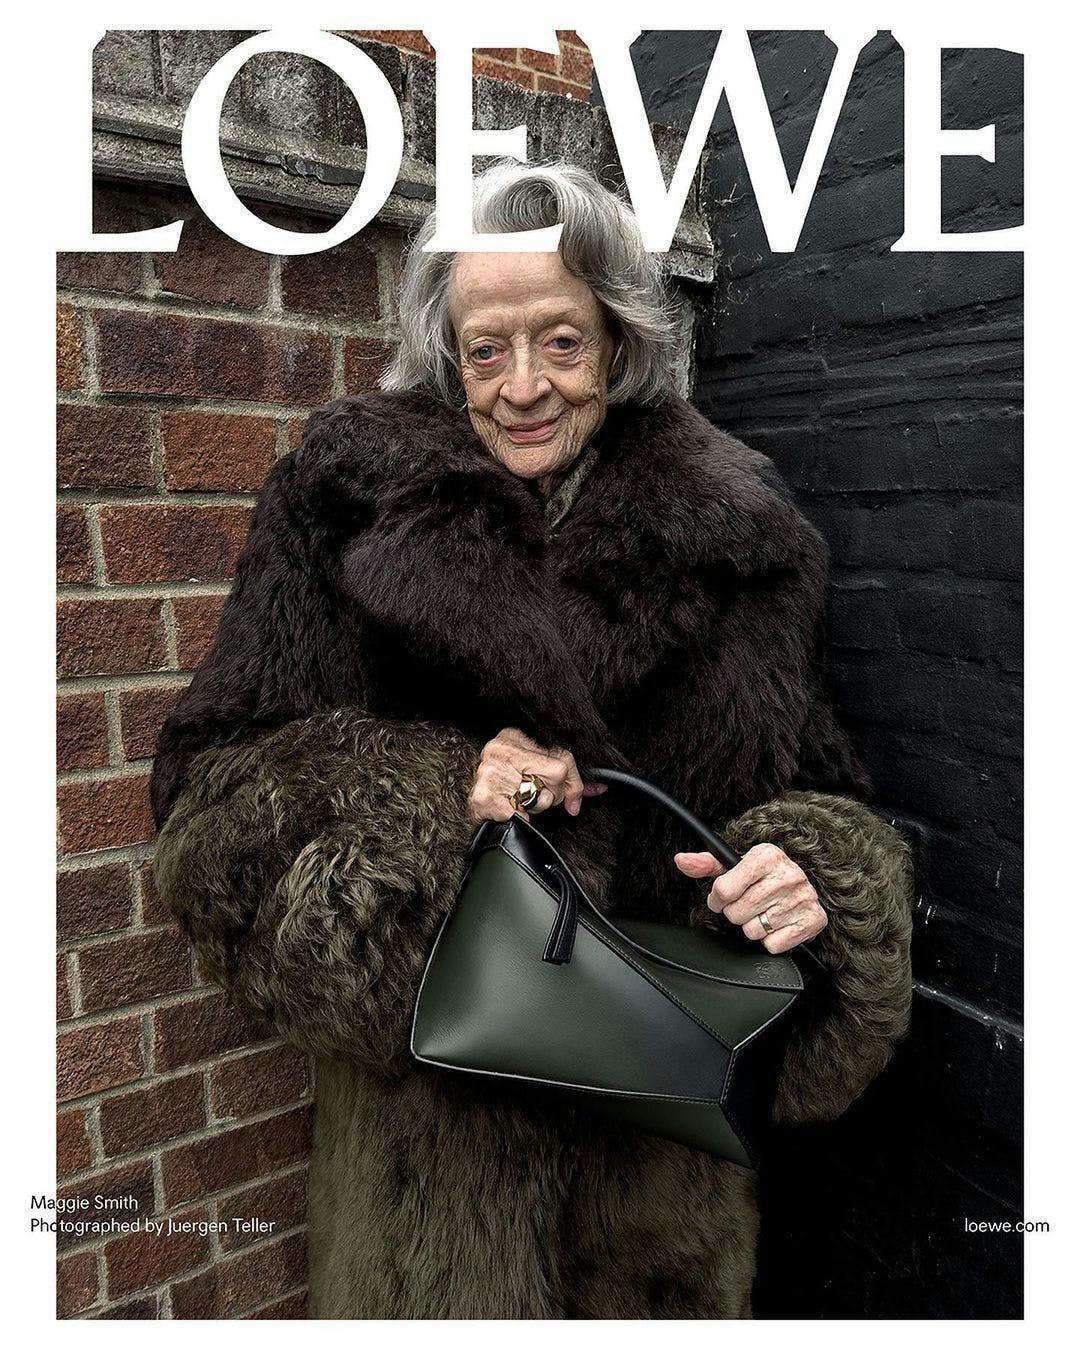 maggie smath wearing a fur coat and purse fronting loewe campaign